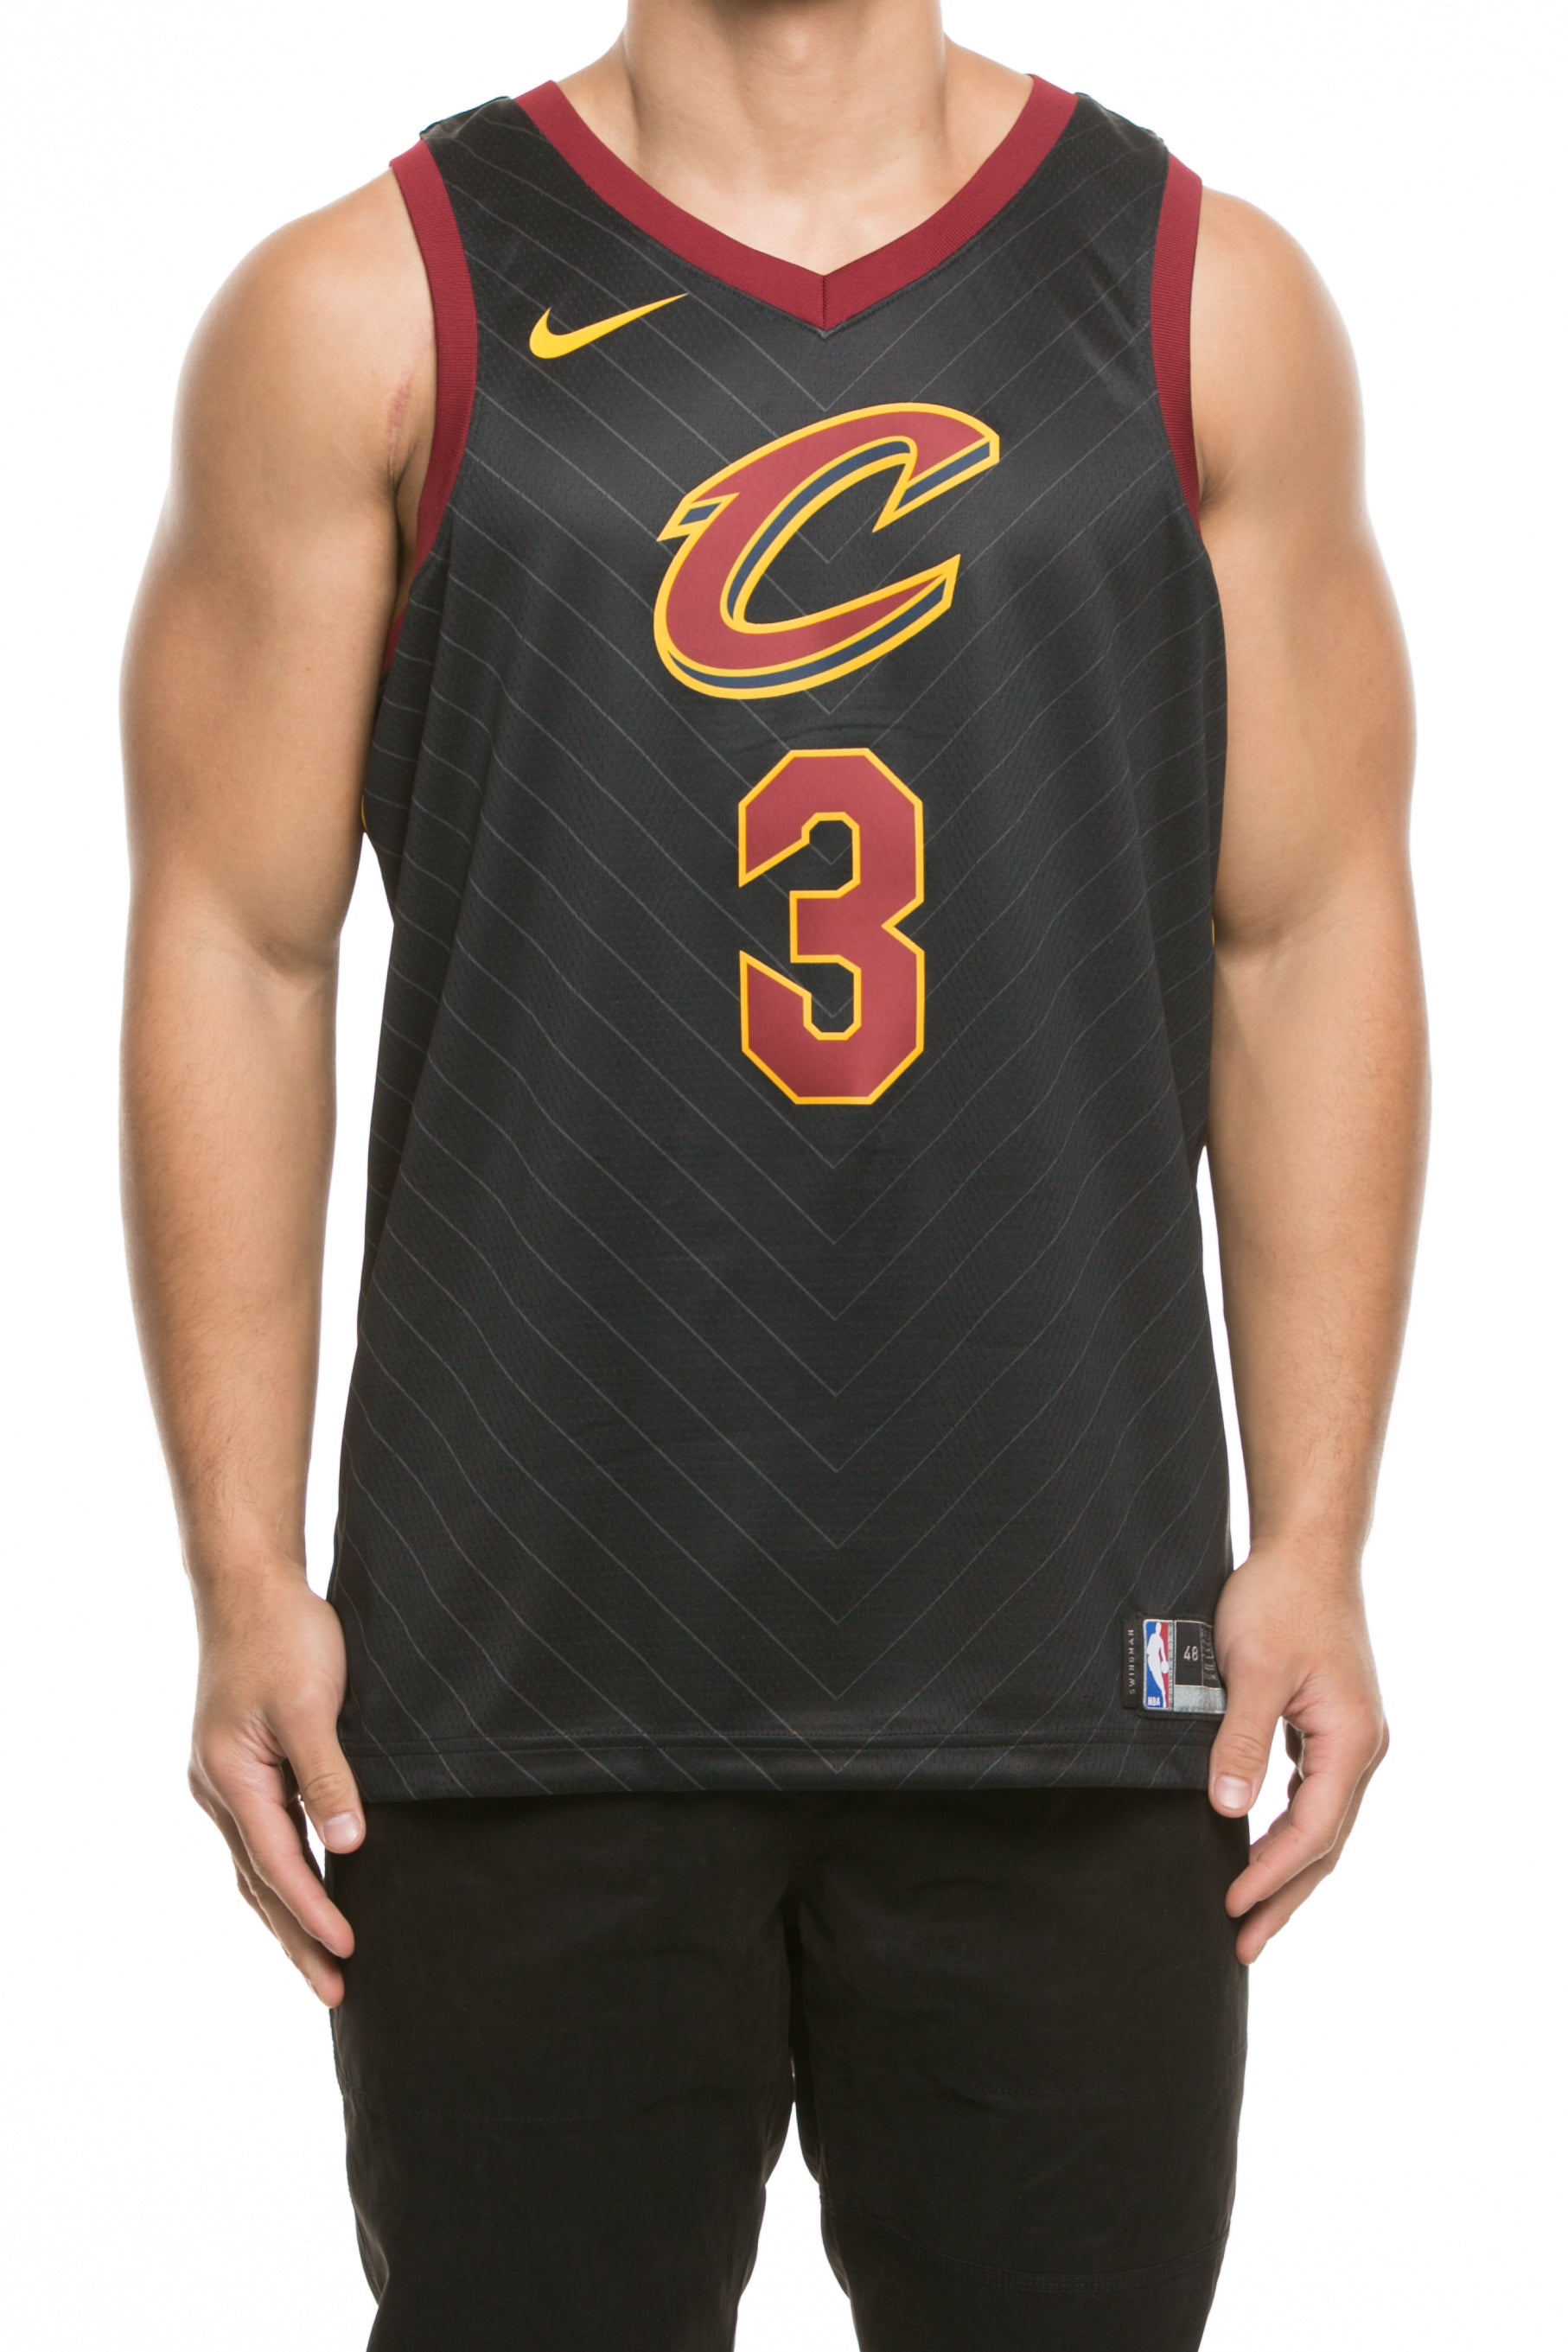 black and gold nba jersey